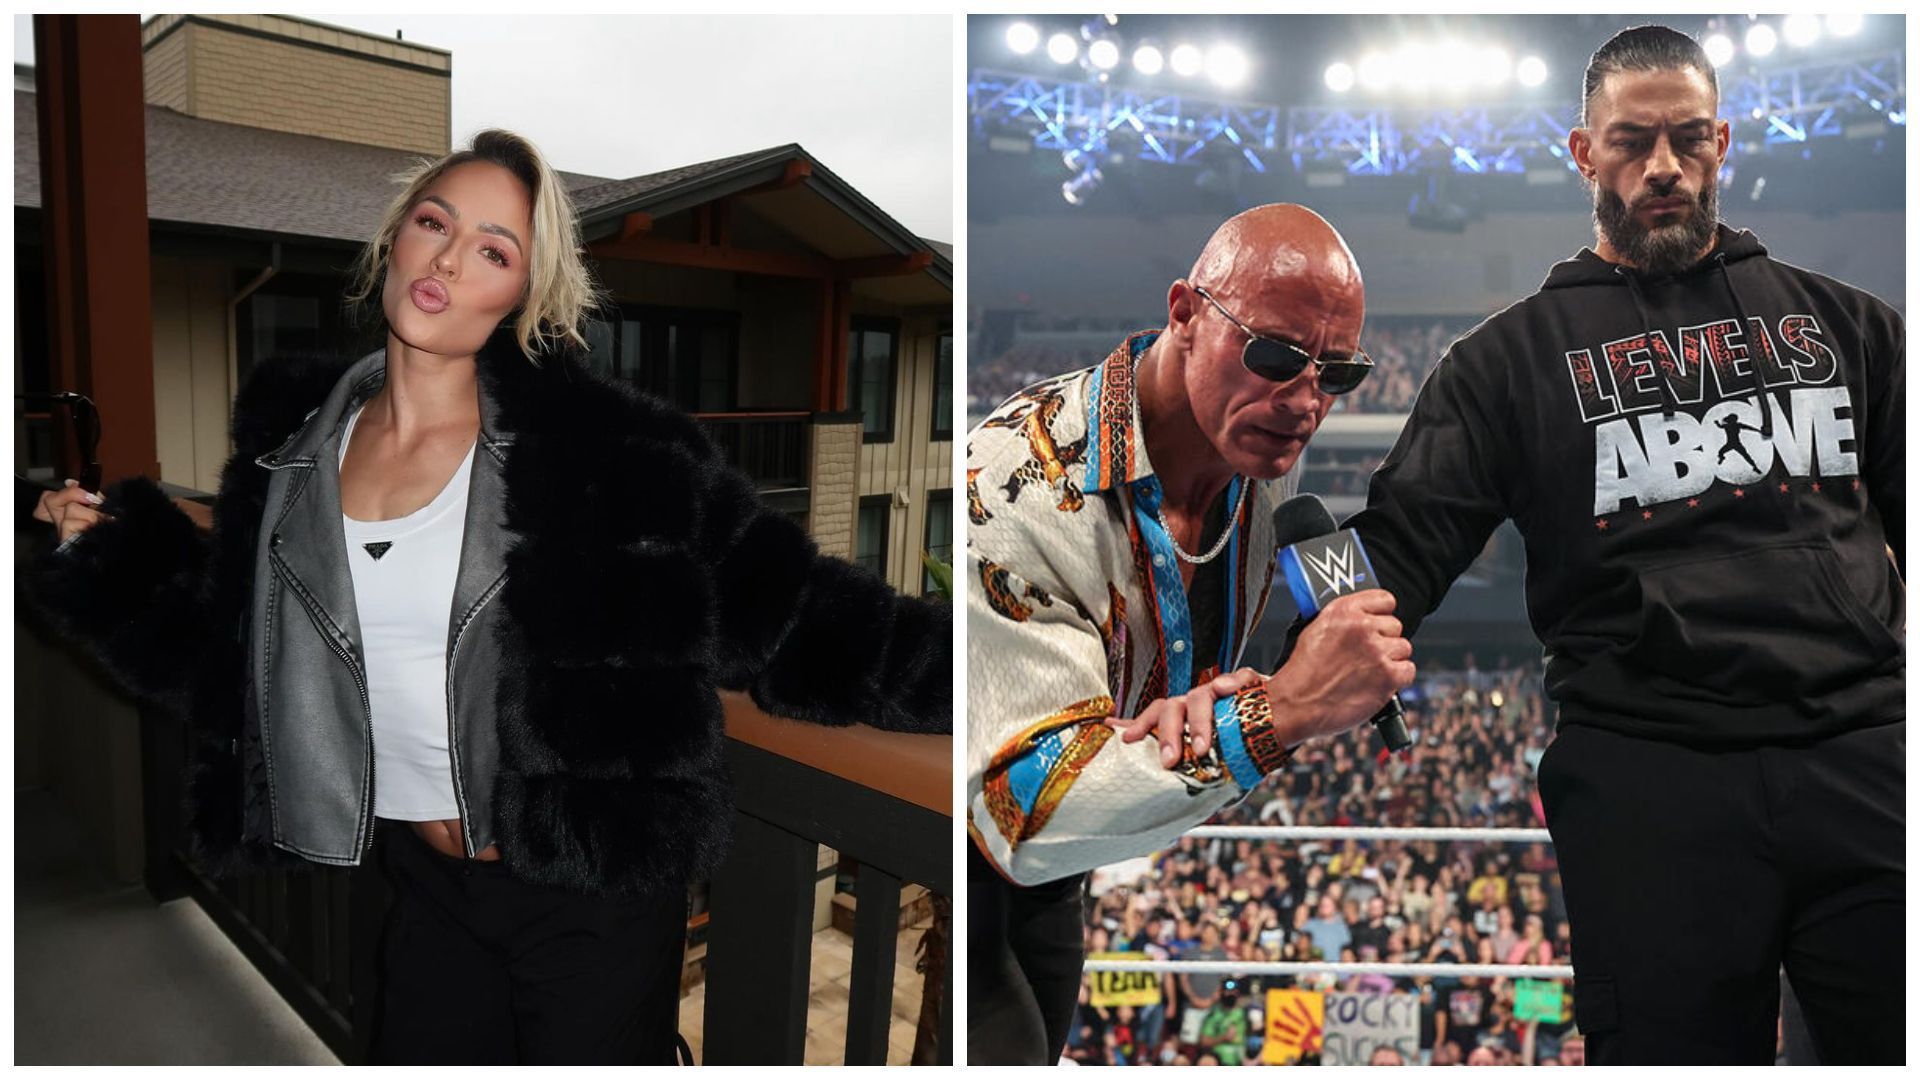 Maxxine Dupri (left), and The Rock &amp; Roman Reigns on WWE SmackDown (right).